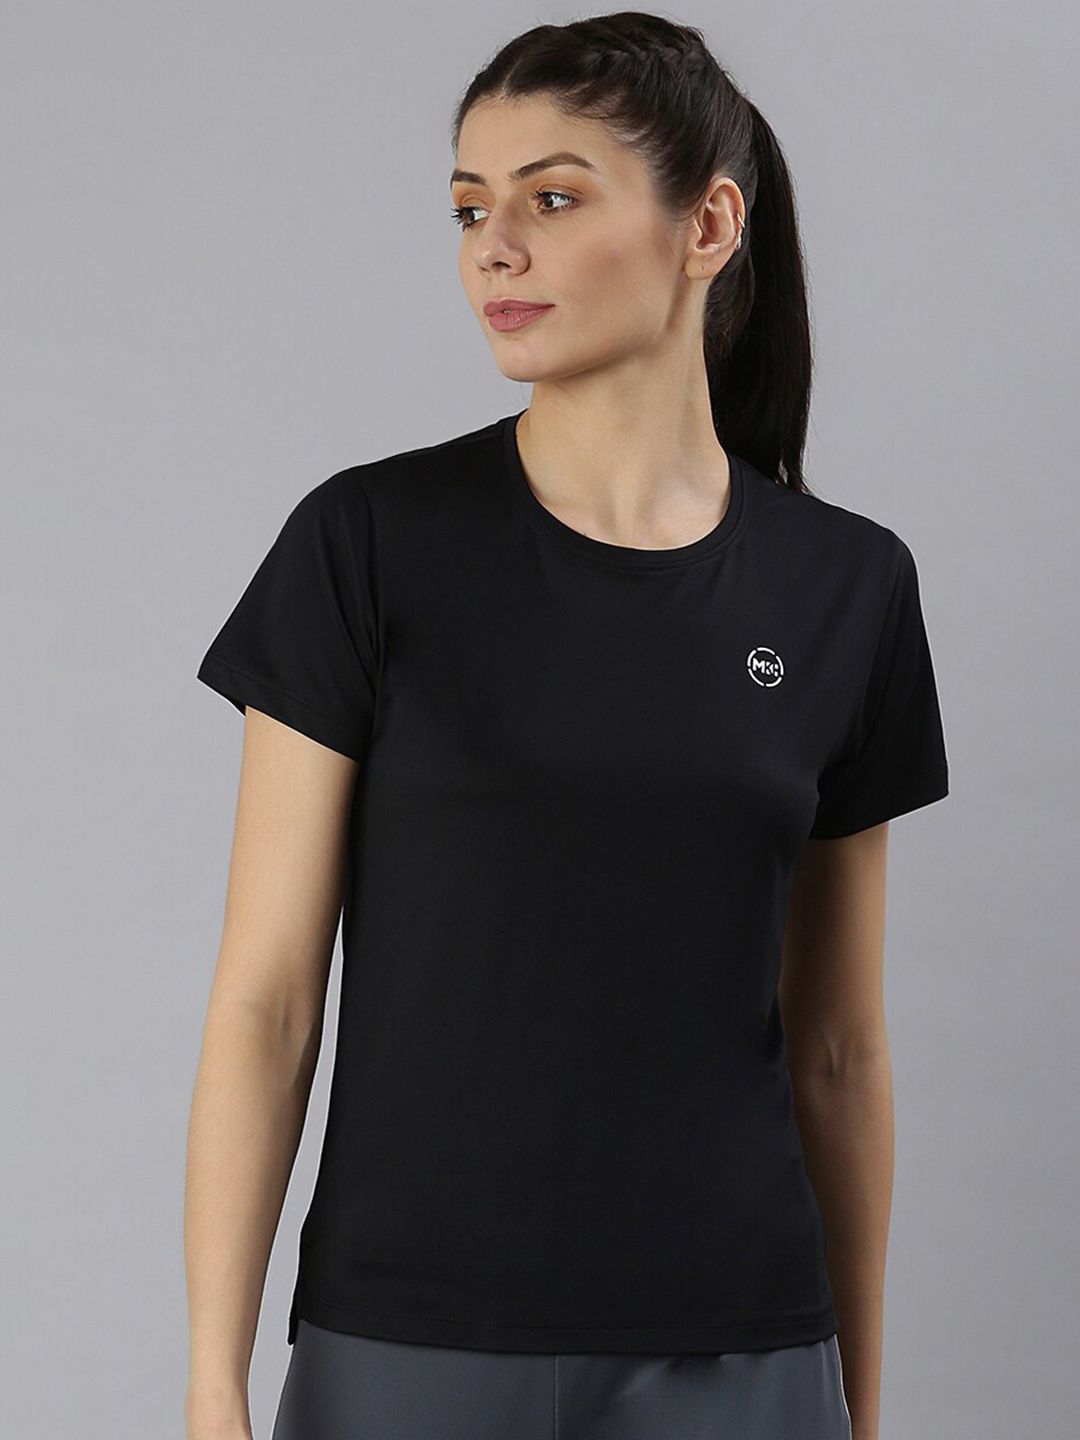 MKH Women Black Solid  Dri-FIT  T-shirt Price in India